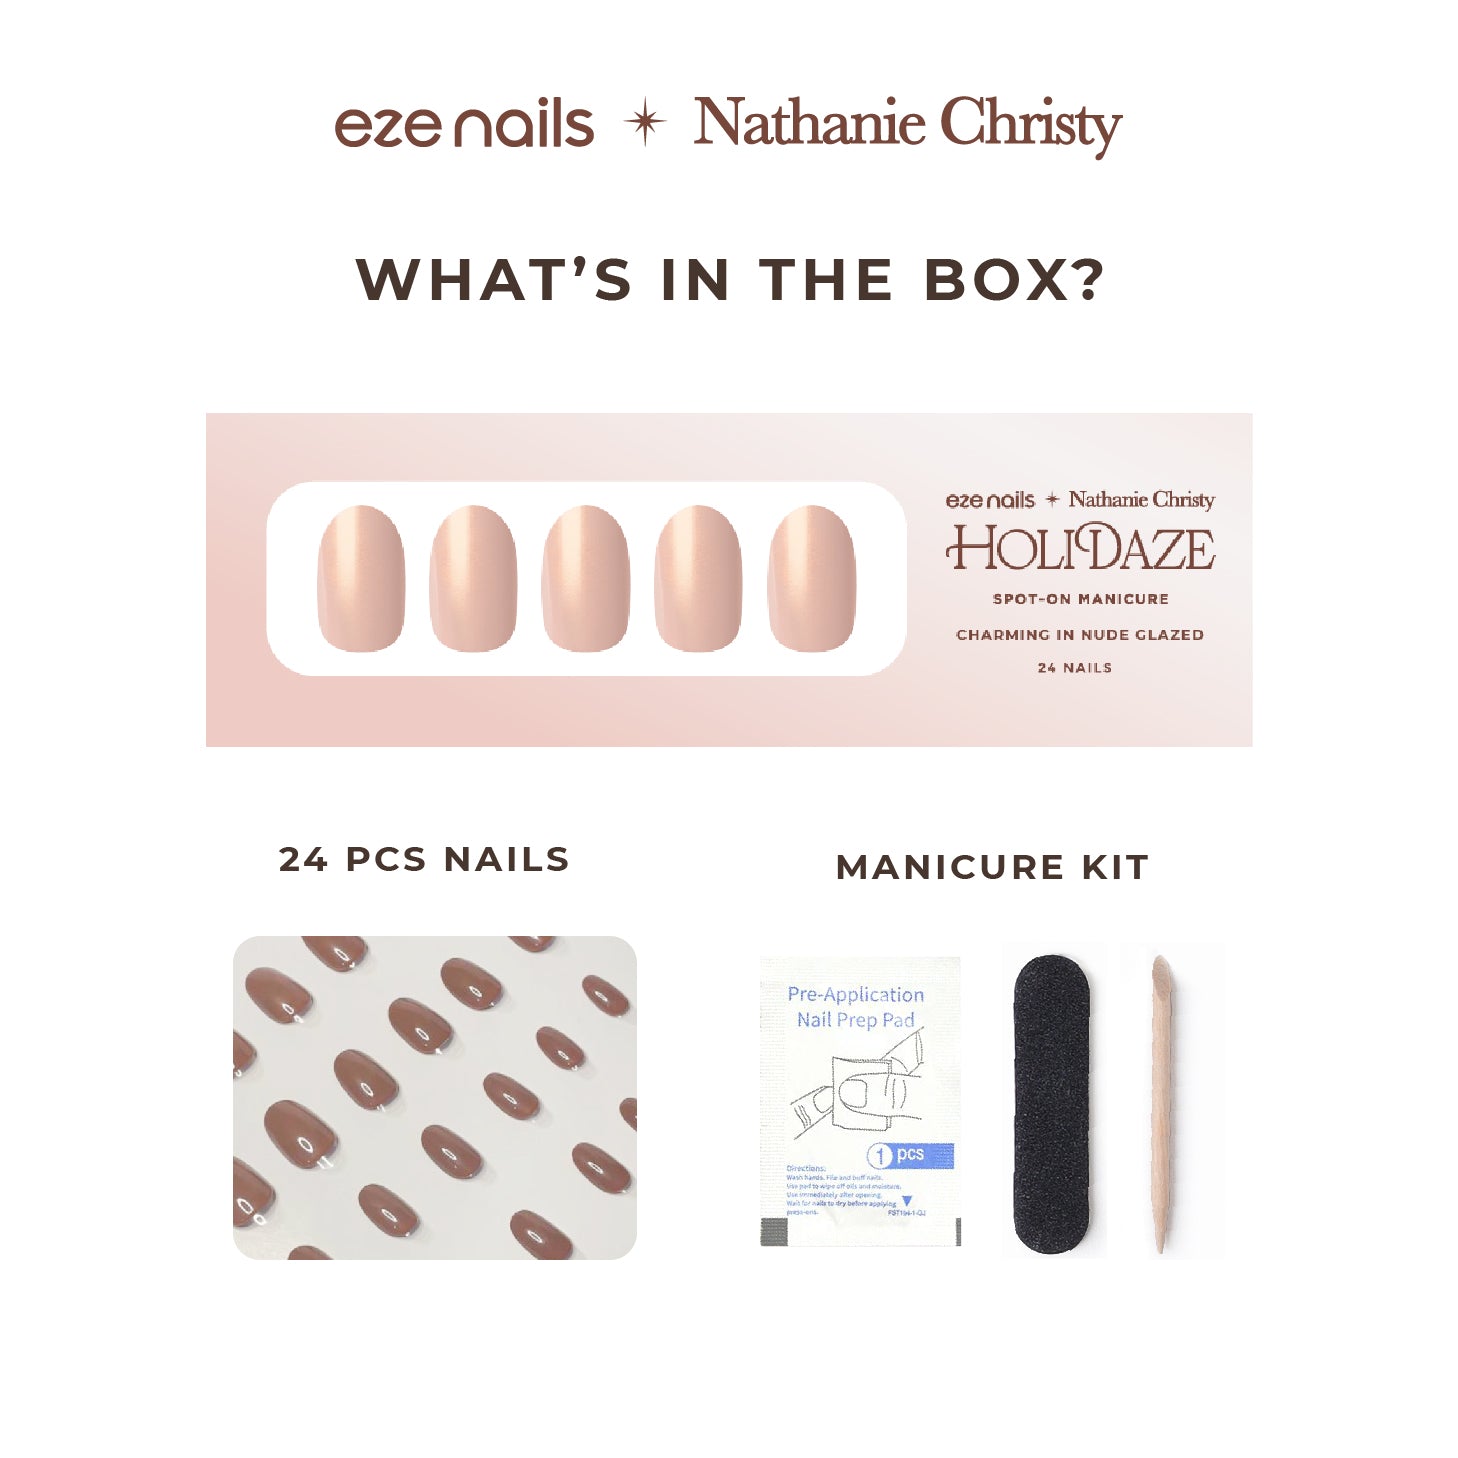 Eze Nails x Nathanie Christy -  Charming In Nude Glazed Spot on Manicure (Kuku Tempel Tangan)